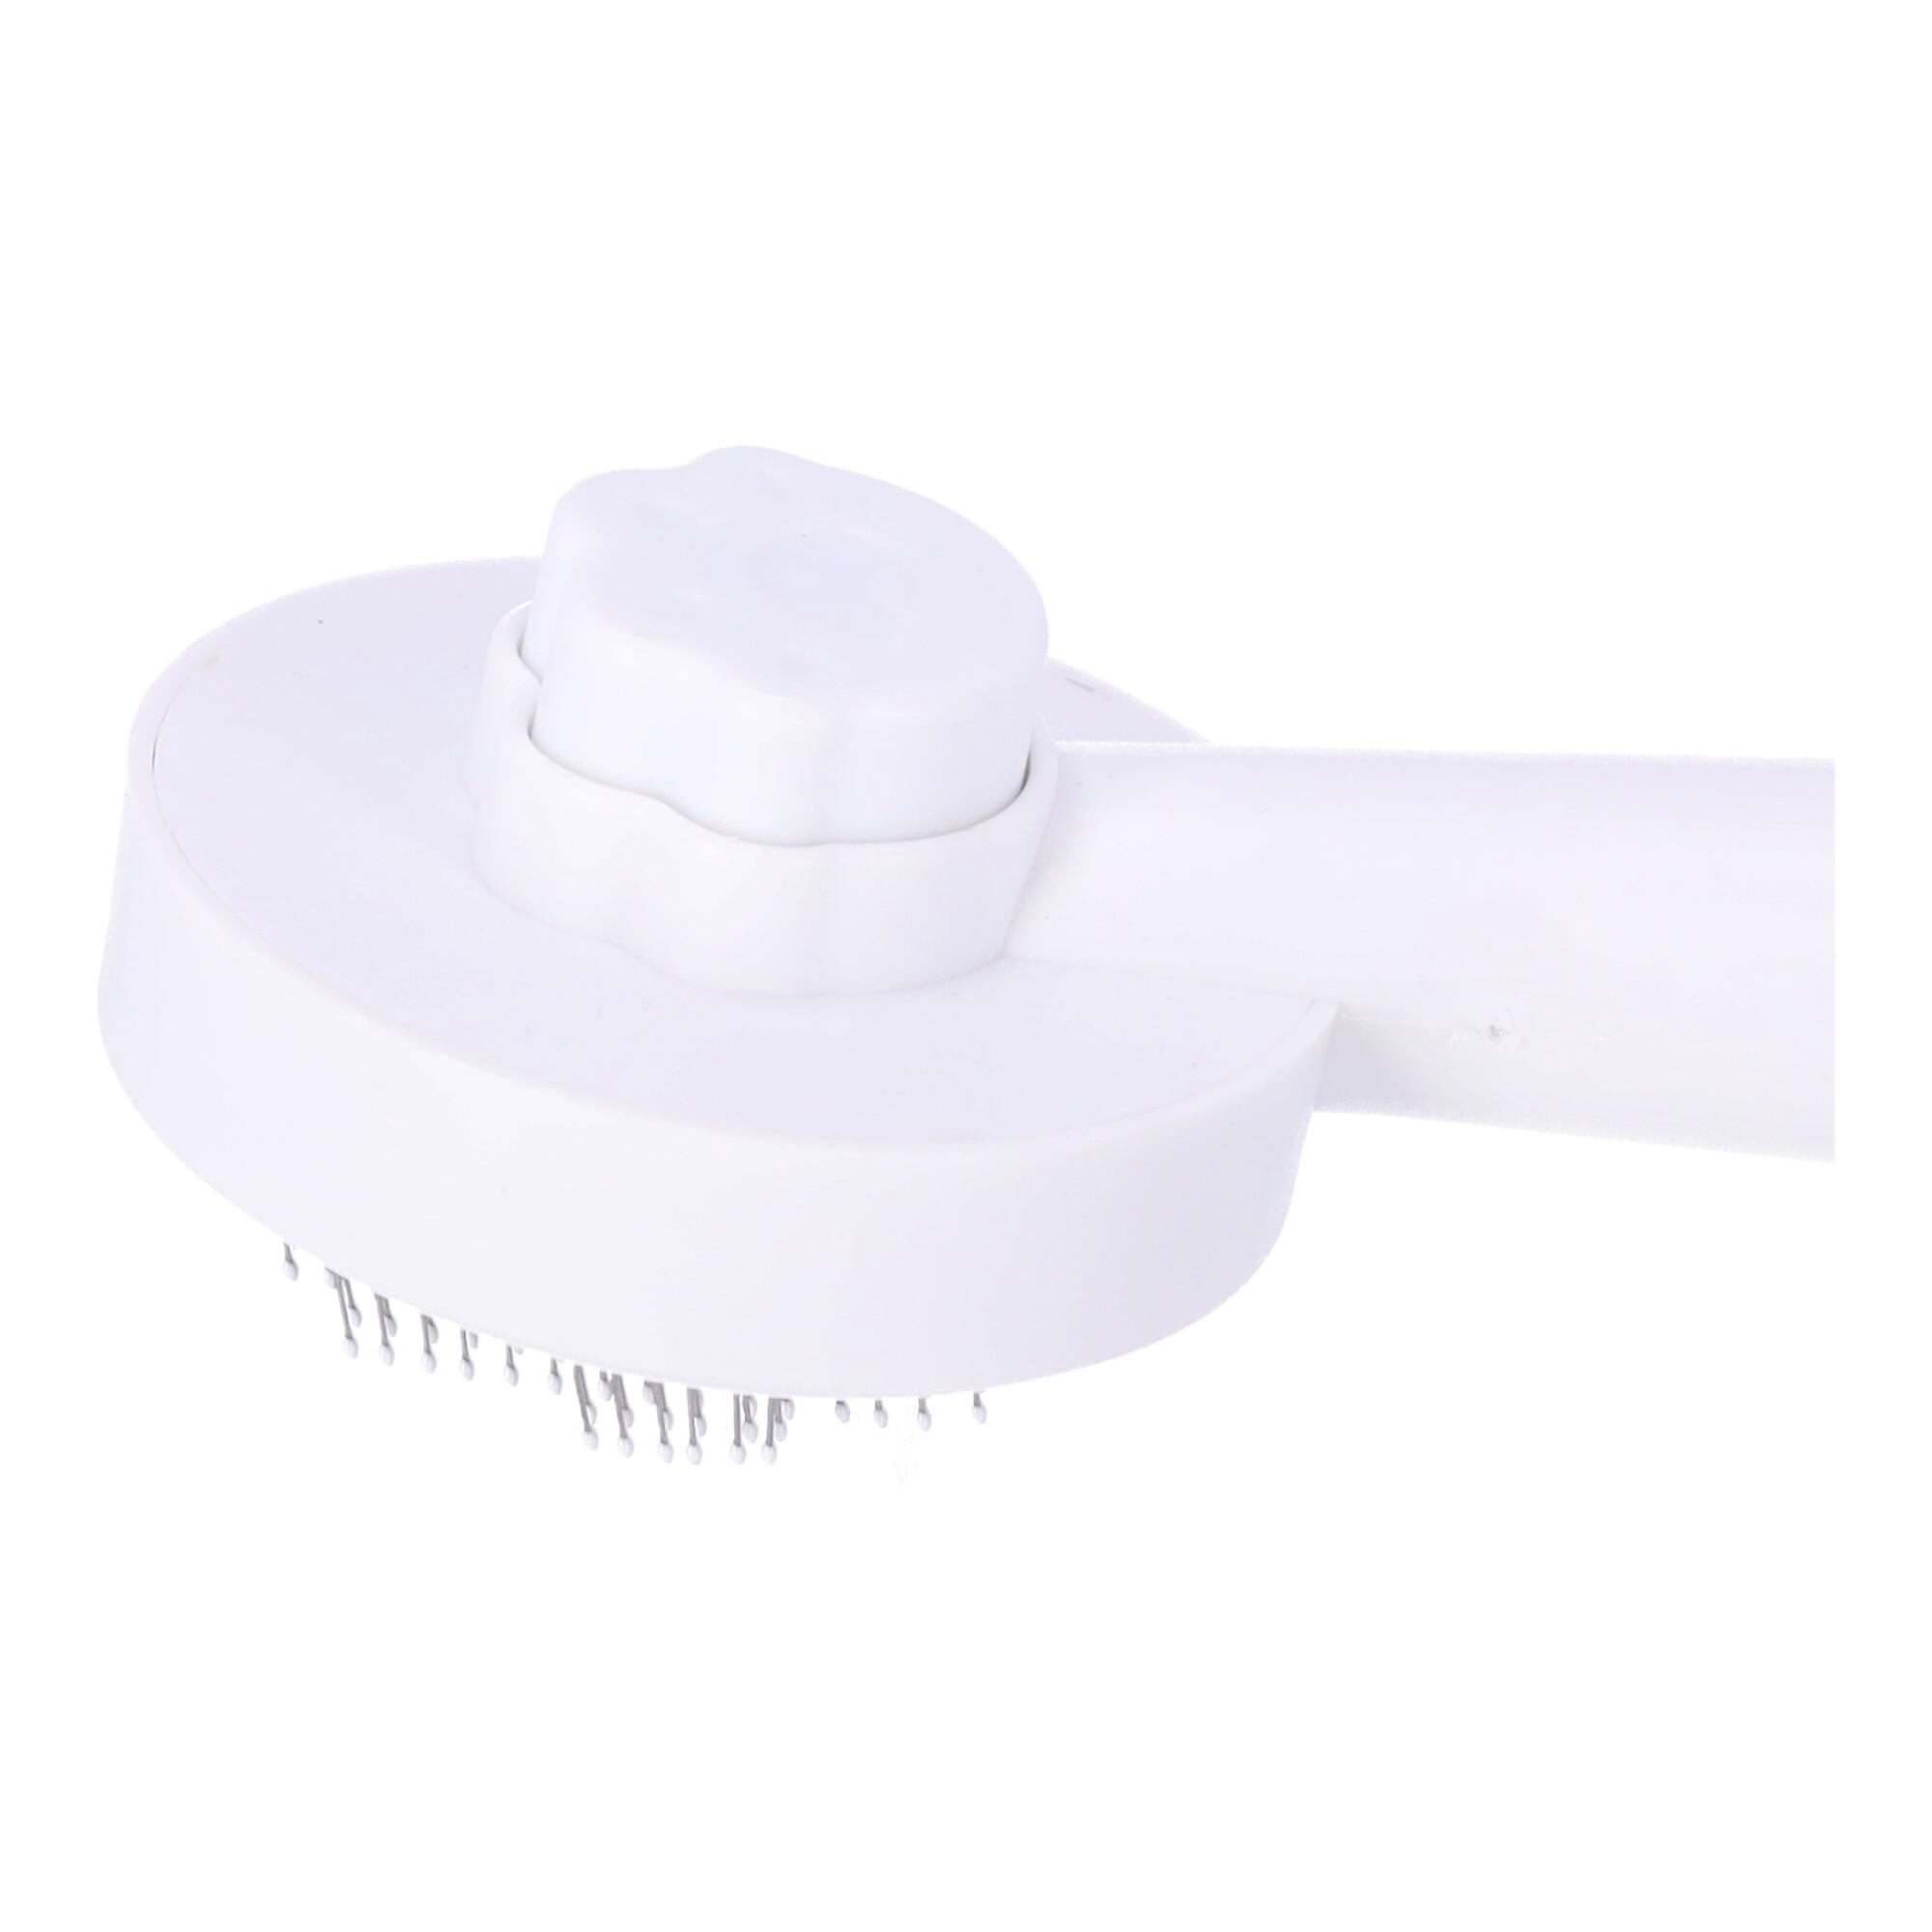 Brush for hair removal dog or cat - white